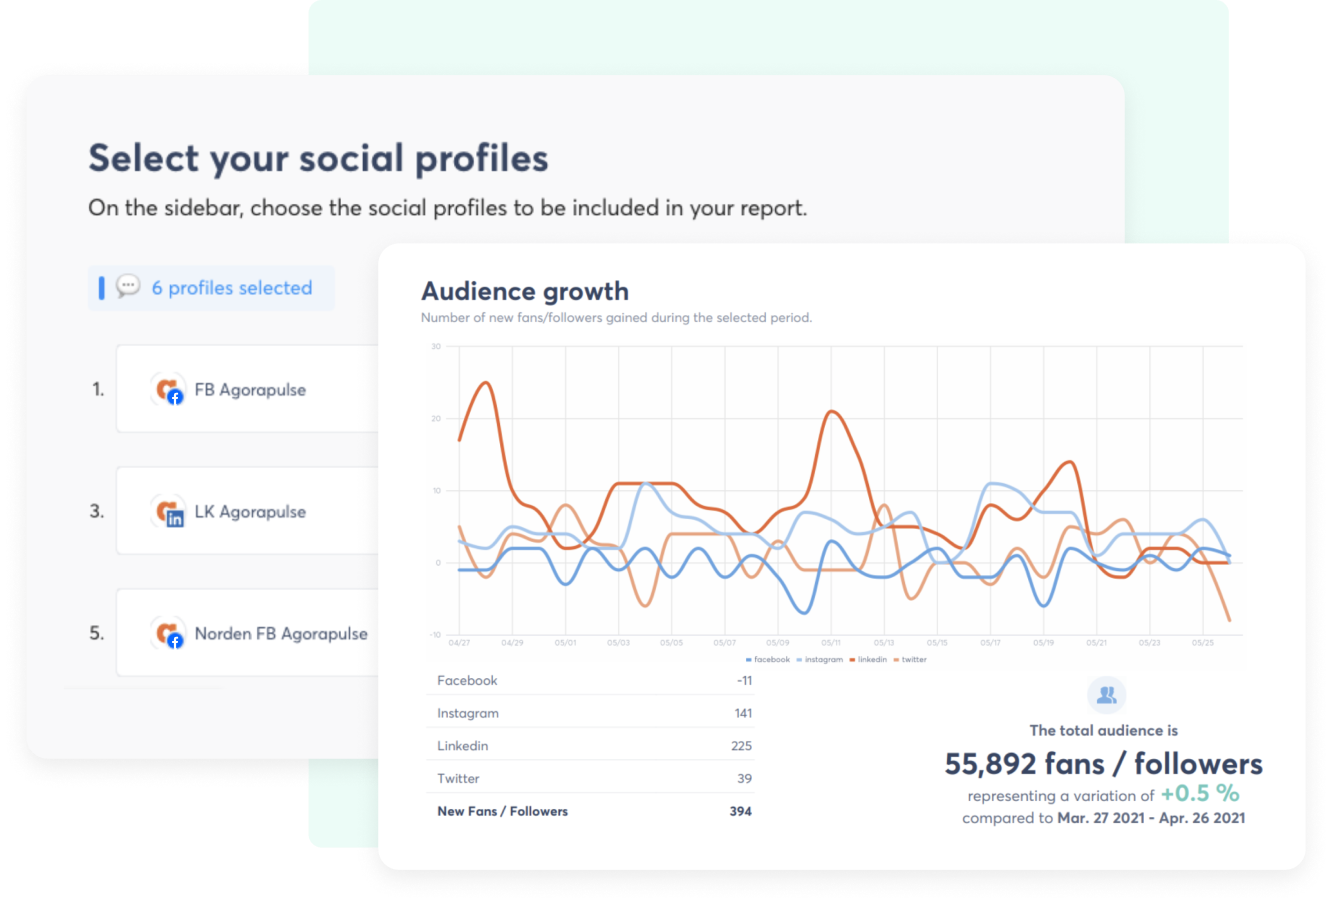 Analytics dashboard showing the selection of six social media profiles for a report and a line graph of audience growth across Facebook, Instagram, LinkedIn, and X(Twitter), with total audience and new followers metrics displayed.